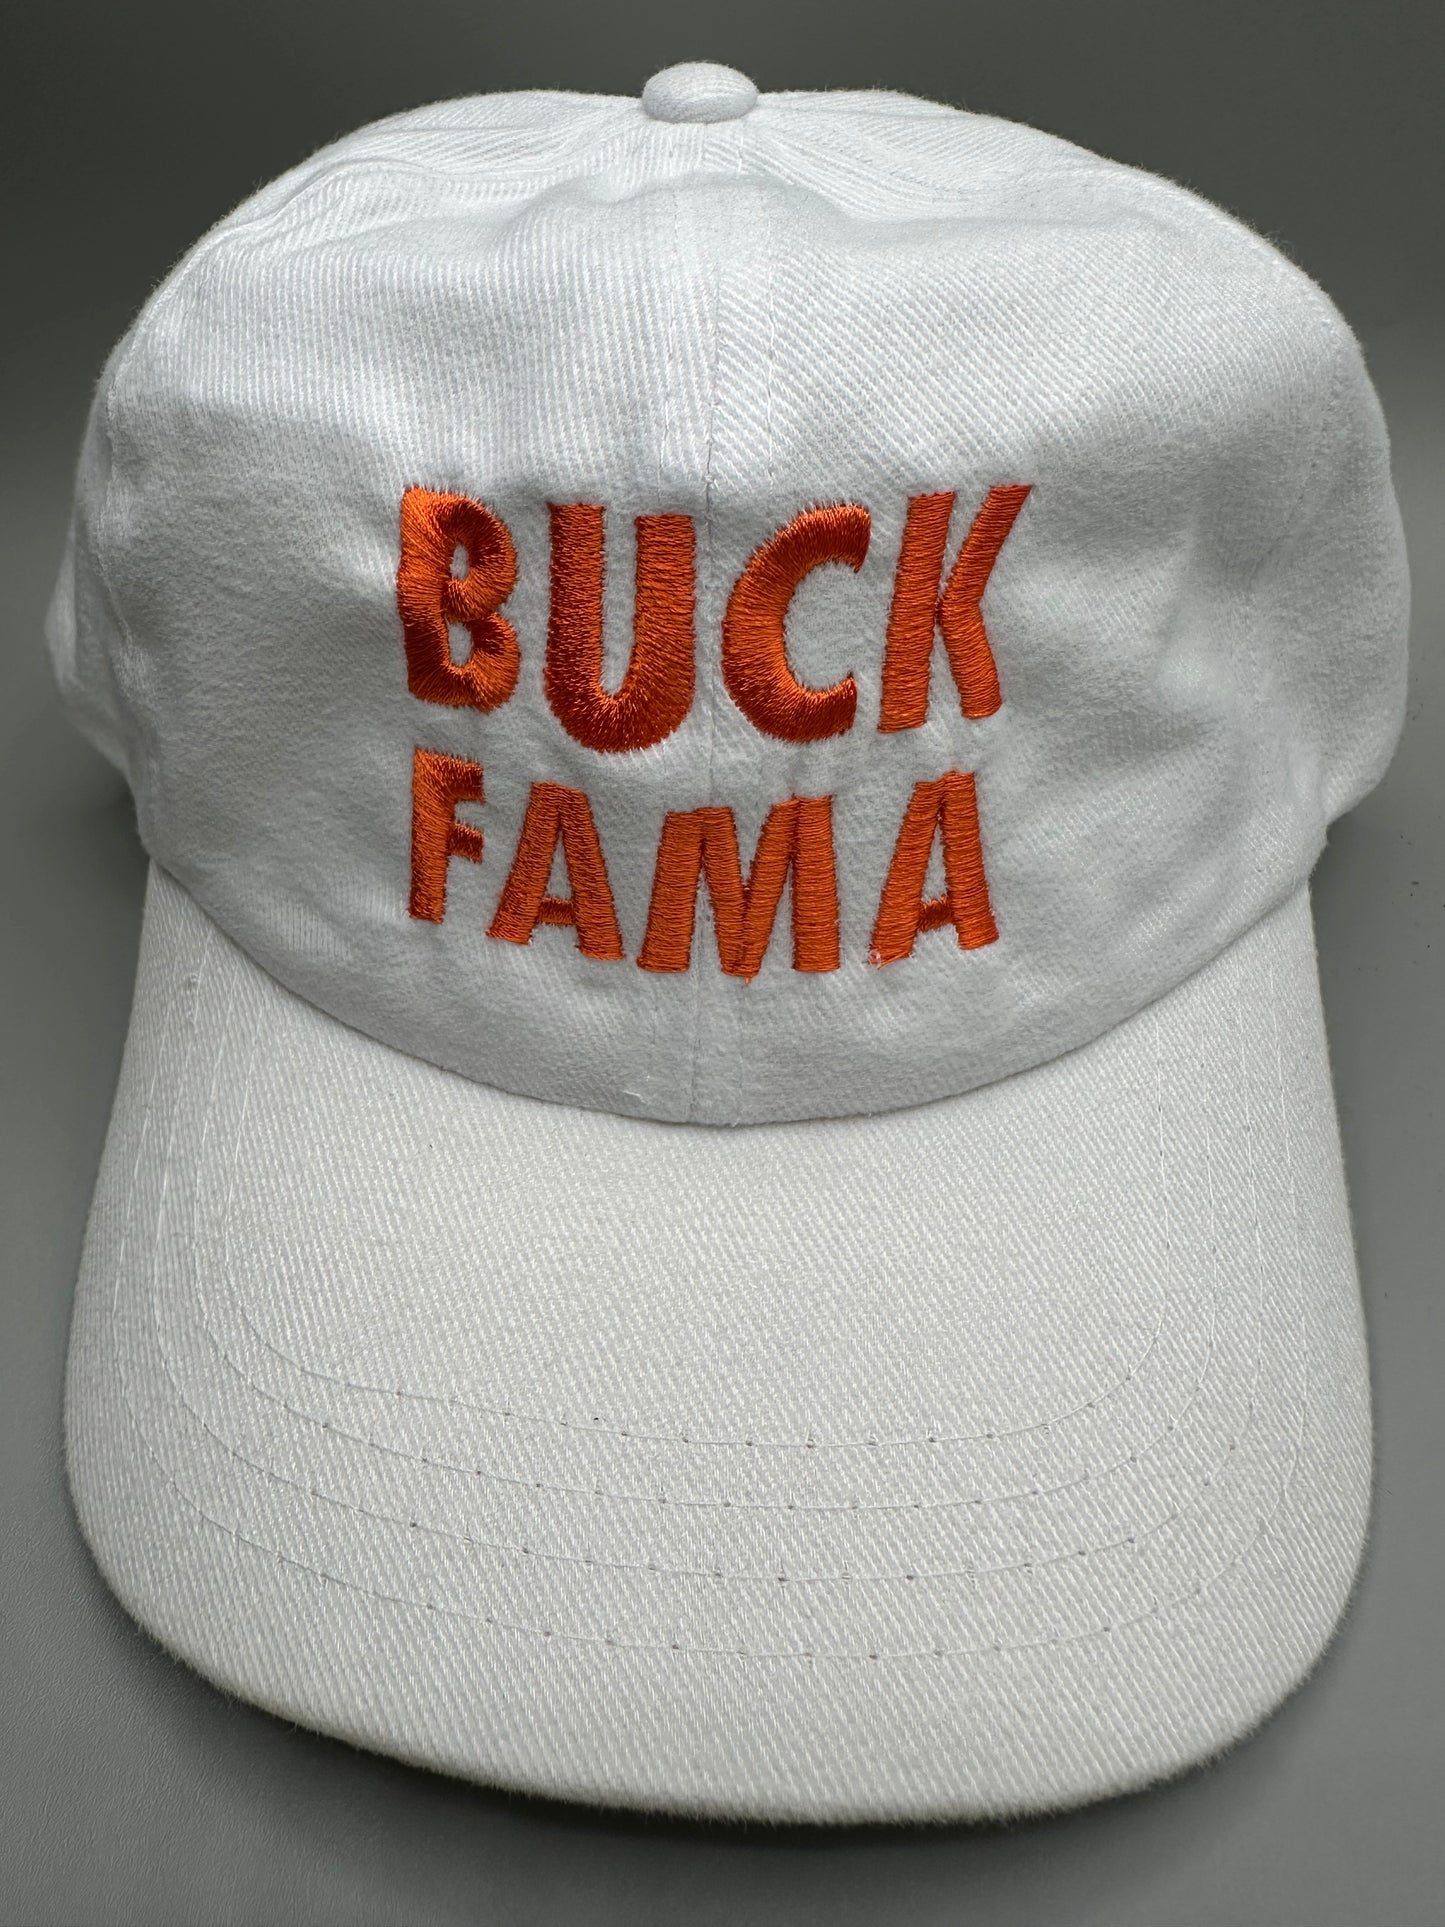 Buck Fama Game Day Hat